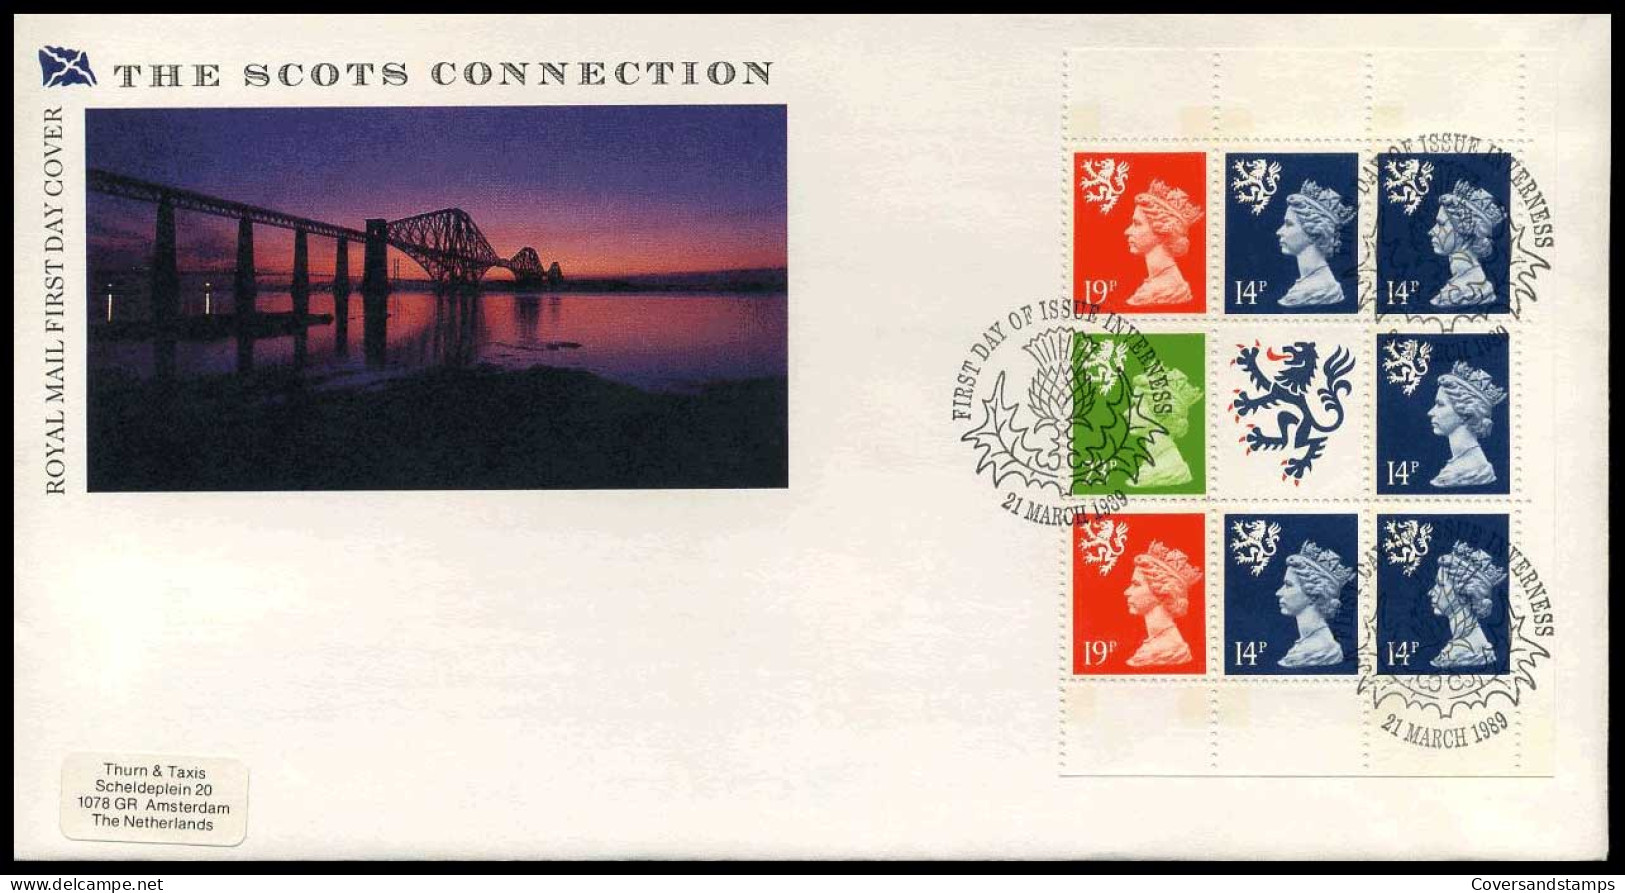 Groot-Brittanië - FDC -  The Scots Connection                    - 1981-1990 Decimal Issues